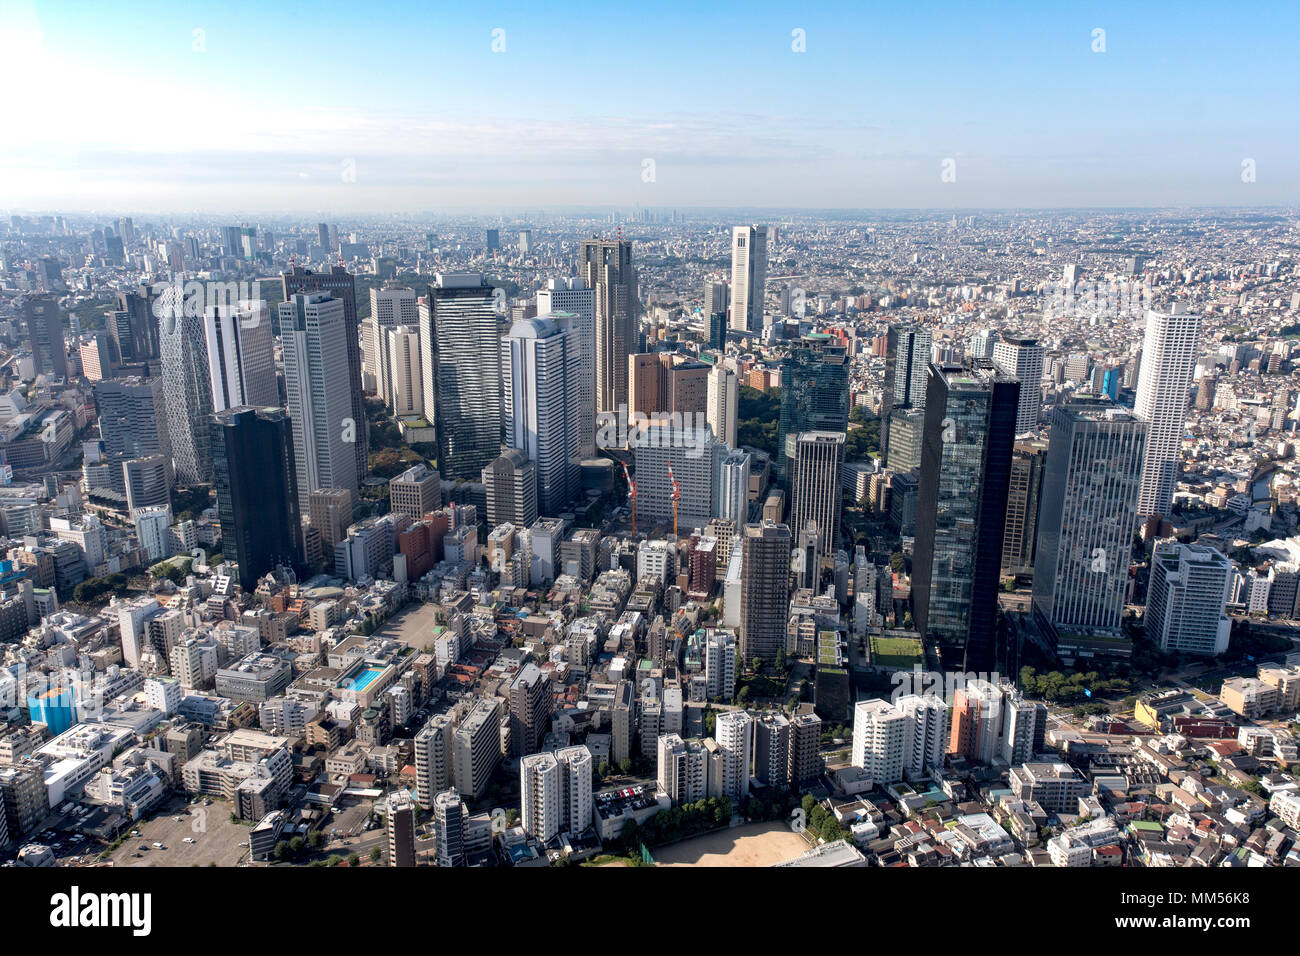 An aerial view of Shinjuku’s skyscraper district from a UH-1N Iroquois assigned to the 459th Airlift Squadron, Sept. 3, 2017, during the Tokyo Metropolis Comprehensive Disaster Prevention Drill. Shinjuku is a special ward in Tokyo, Japan. It is a major commercial and administrative center for the government of Tokyo. The ward has an estimated population of 337,556. (U.S. Air Force photo by Yasuo Osakabe) Stock Photo